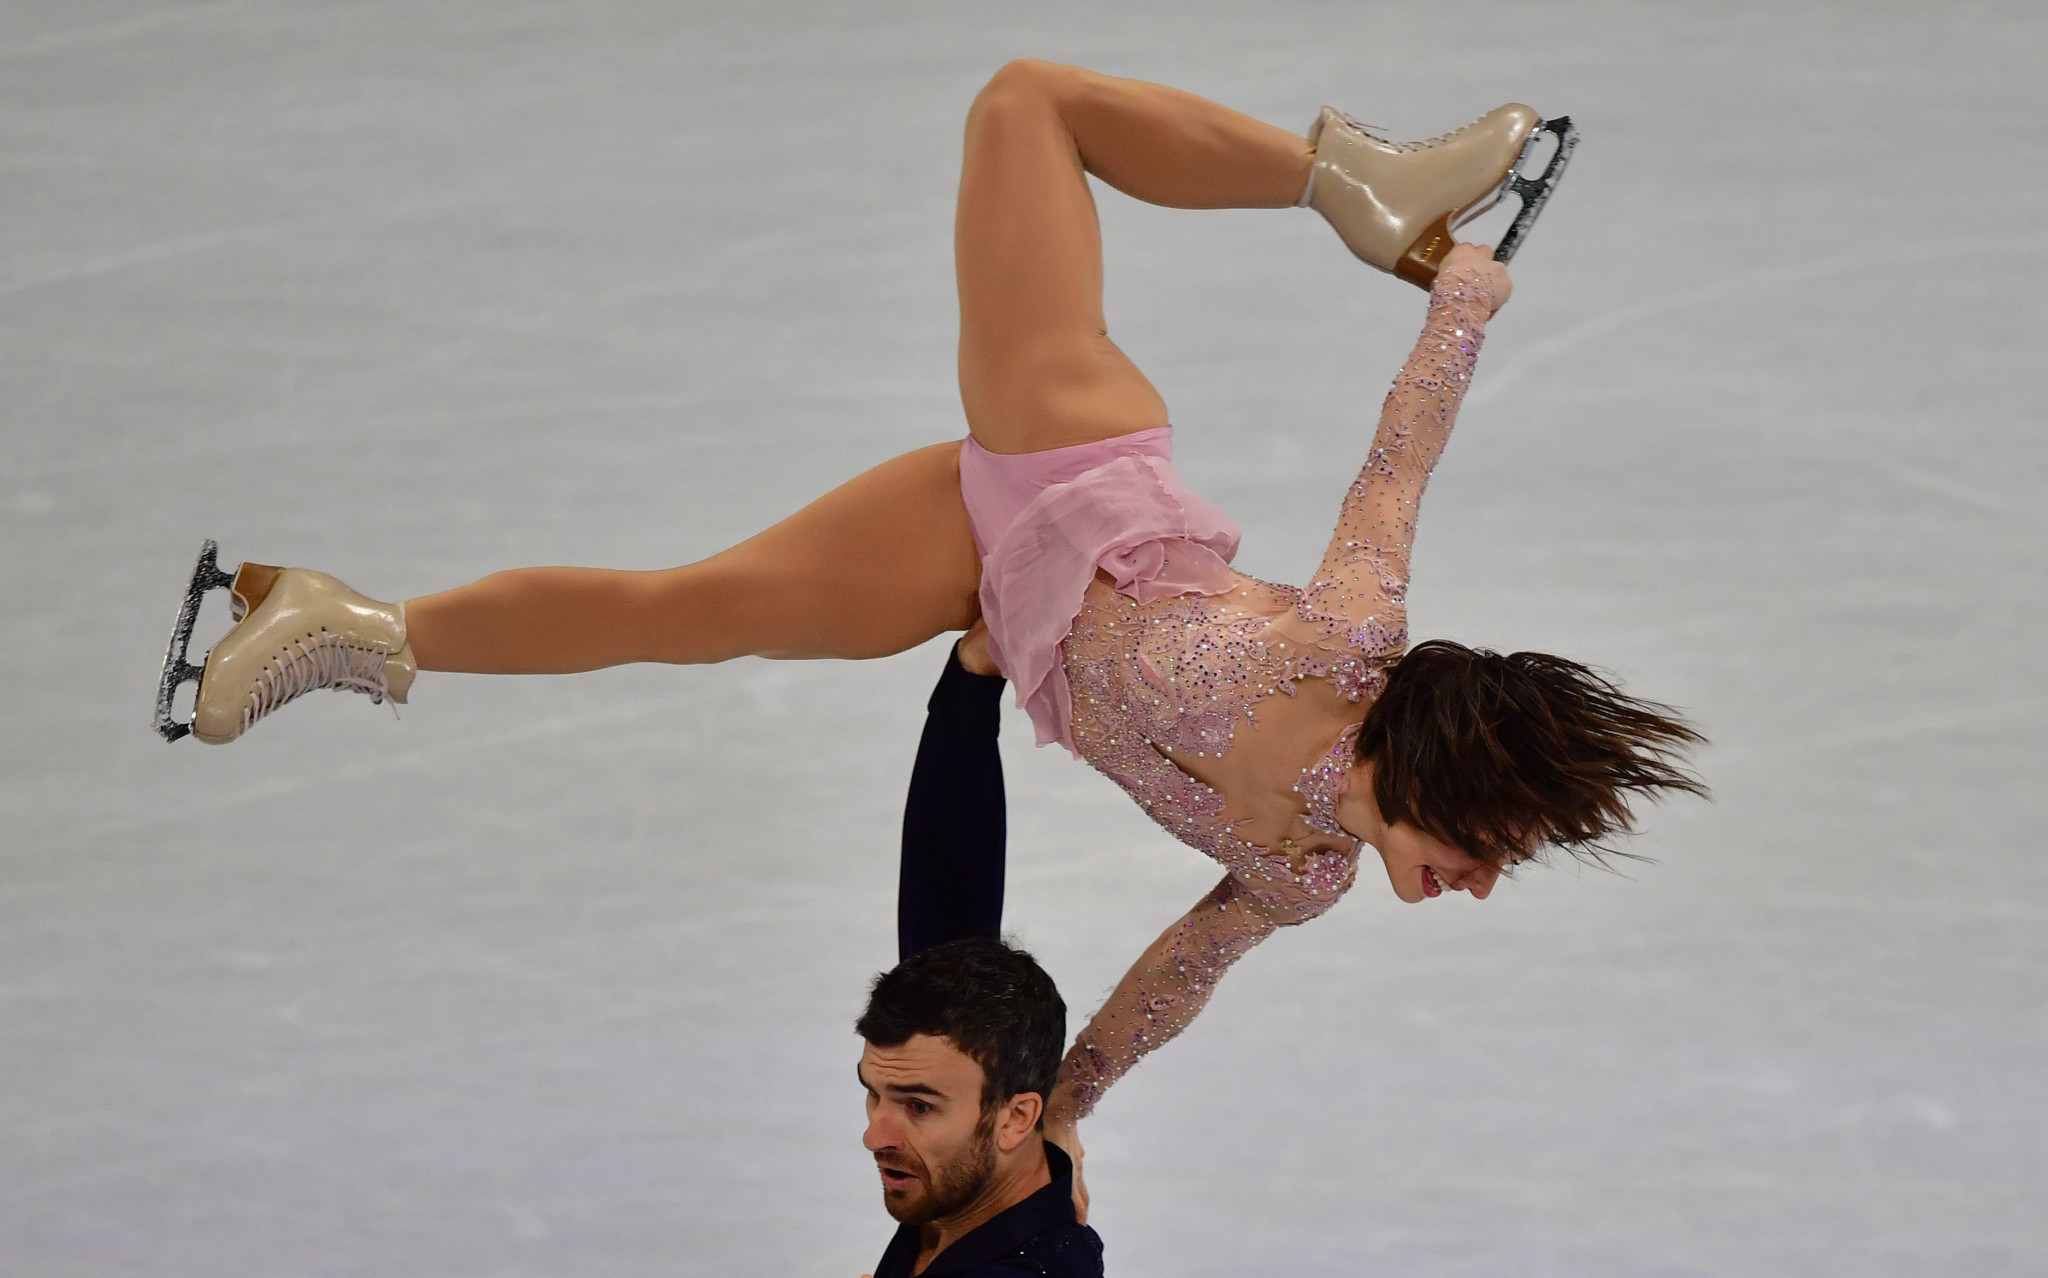 Two-time world champions Meagan Duhamel and Eric Radford of Canada lead the pairs start list ©Getty Images